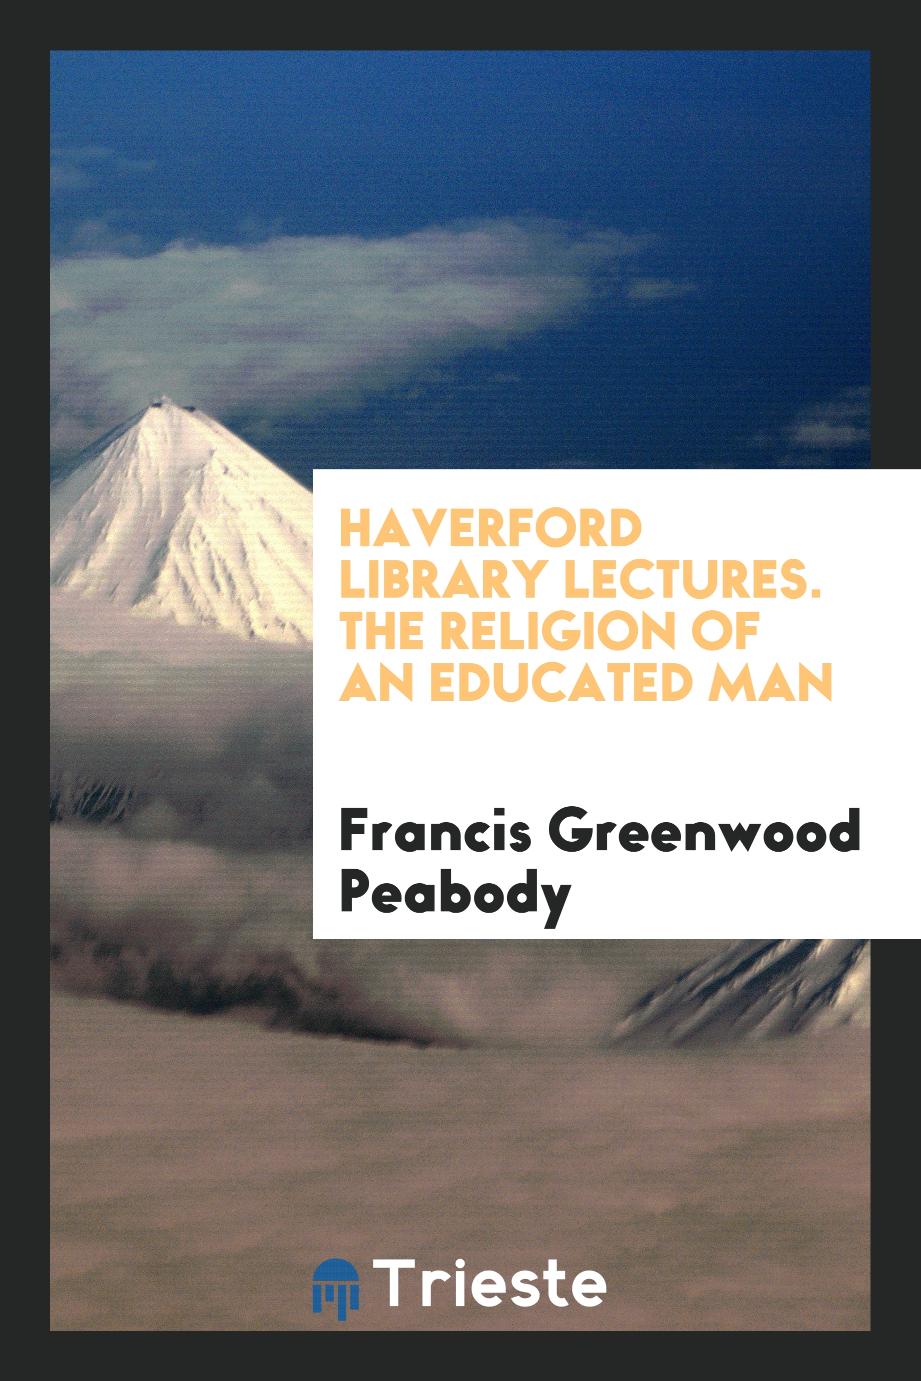 Francis Greenwood Peabody - Haverford Library Lectures. The Religion of an Educated Man